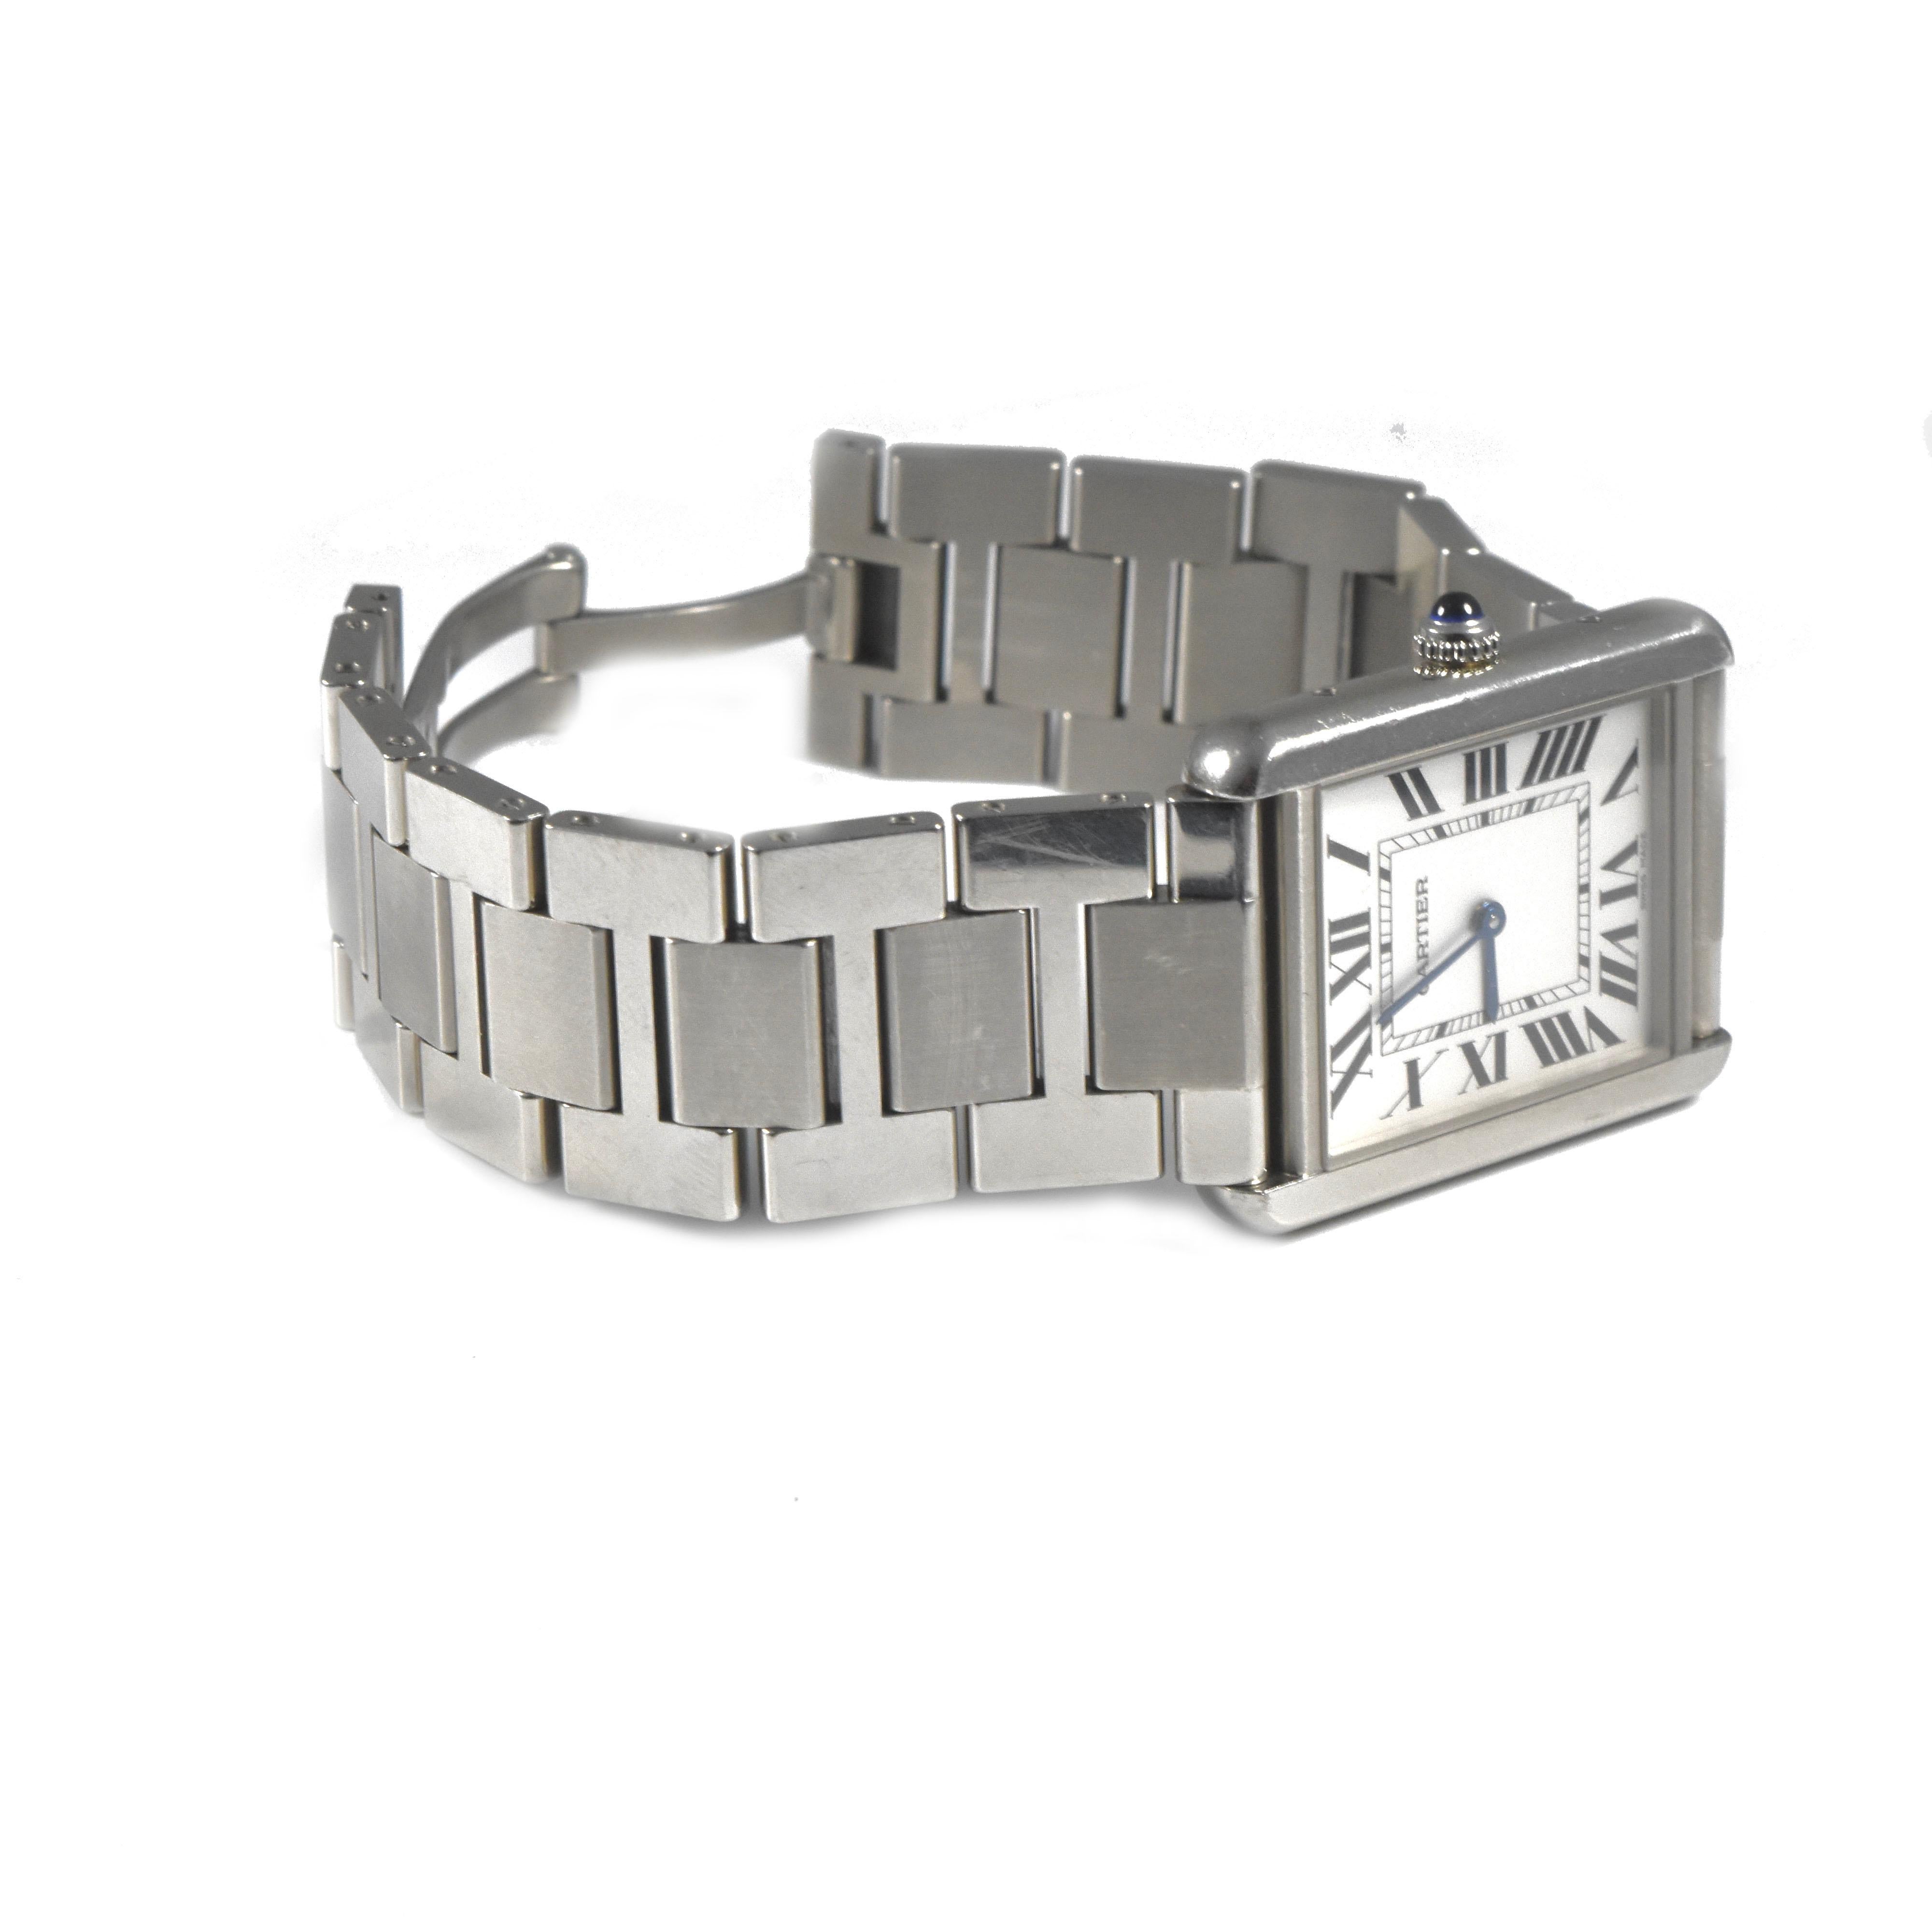 Brand : Cartier
Series : Tank Solo
Ref No : 3169
Metal : Stainless Steel
Movement :  Quartz
Case Material : Stainless Steel
Case Size : 34.8 x 27.4 millimeters
Dial : Silvered opaline
Crystal : Scratch resistant sapphire
Bracelet Material : 